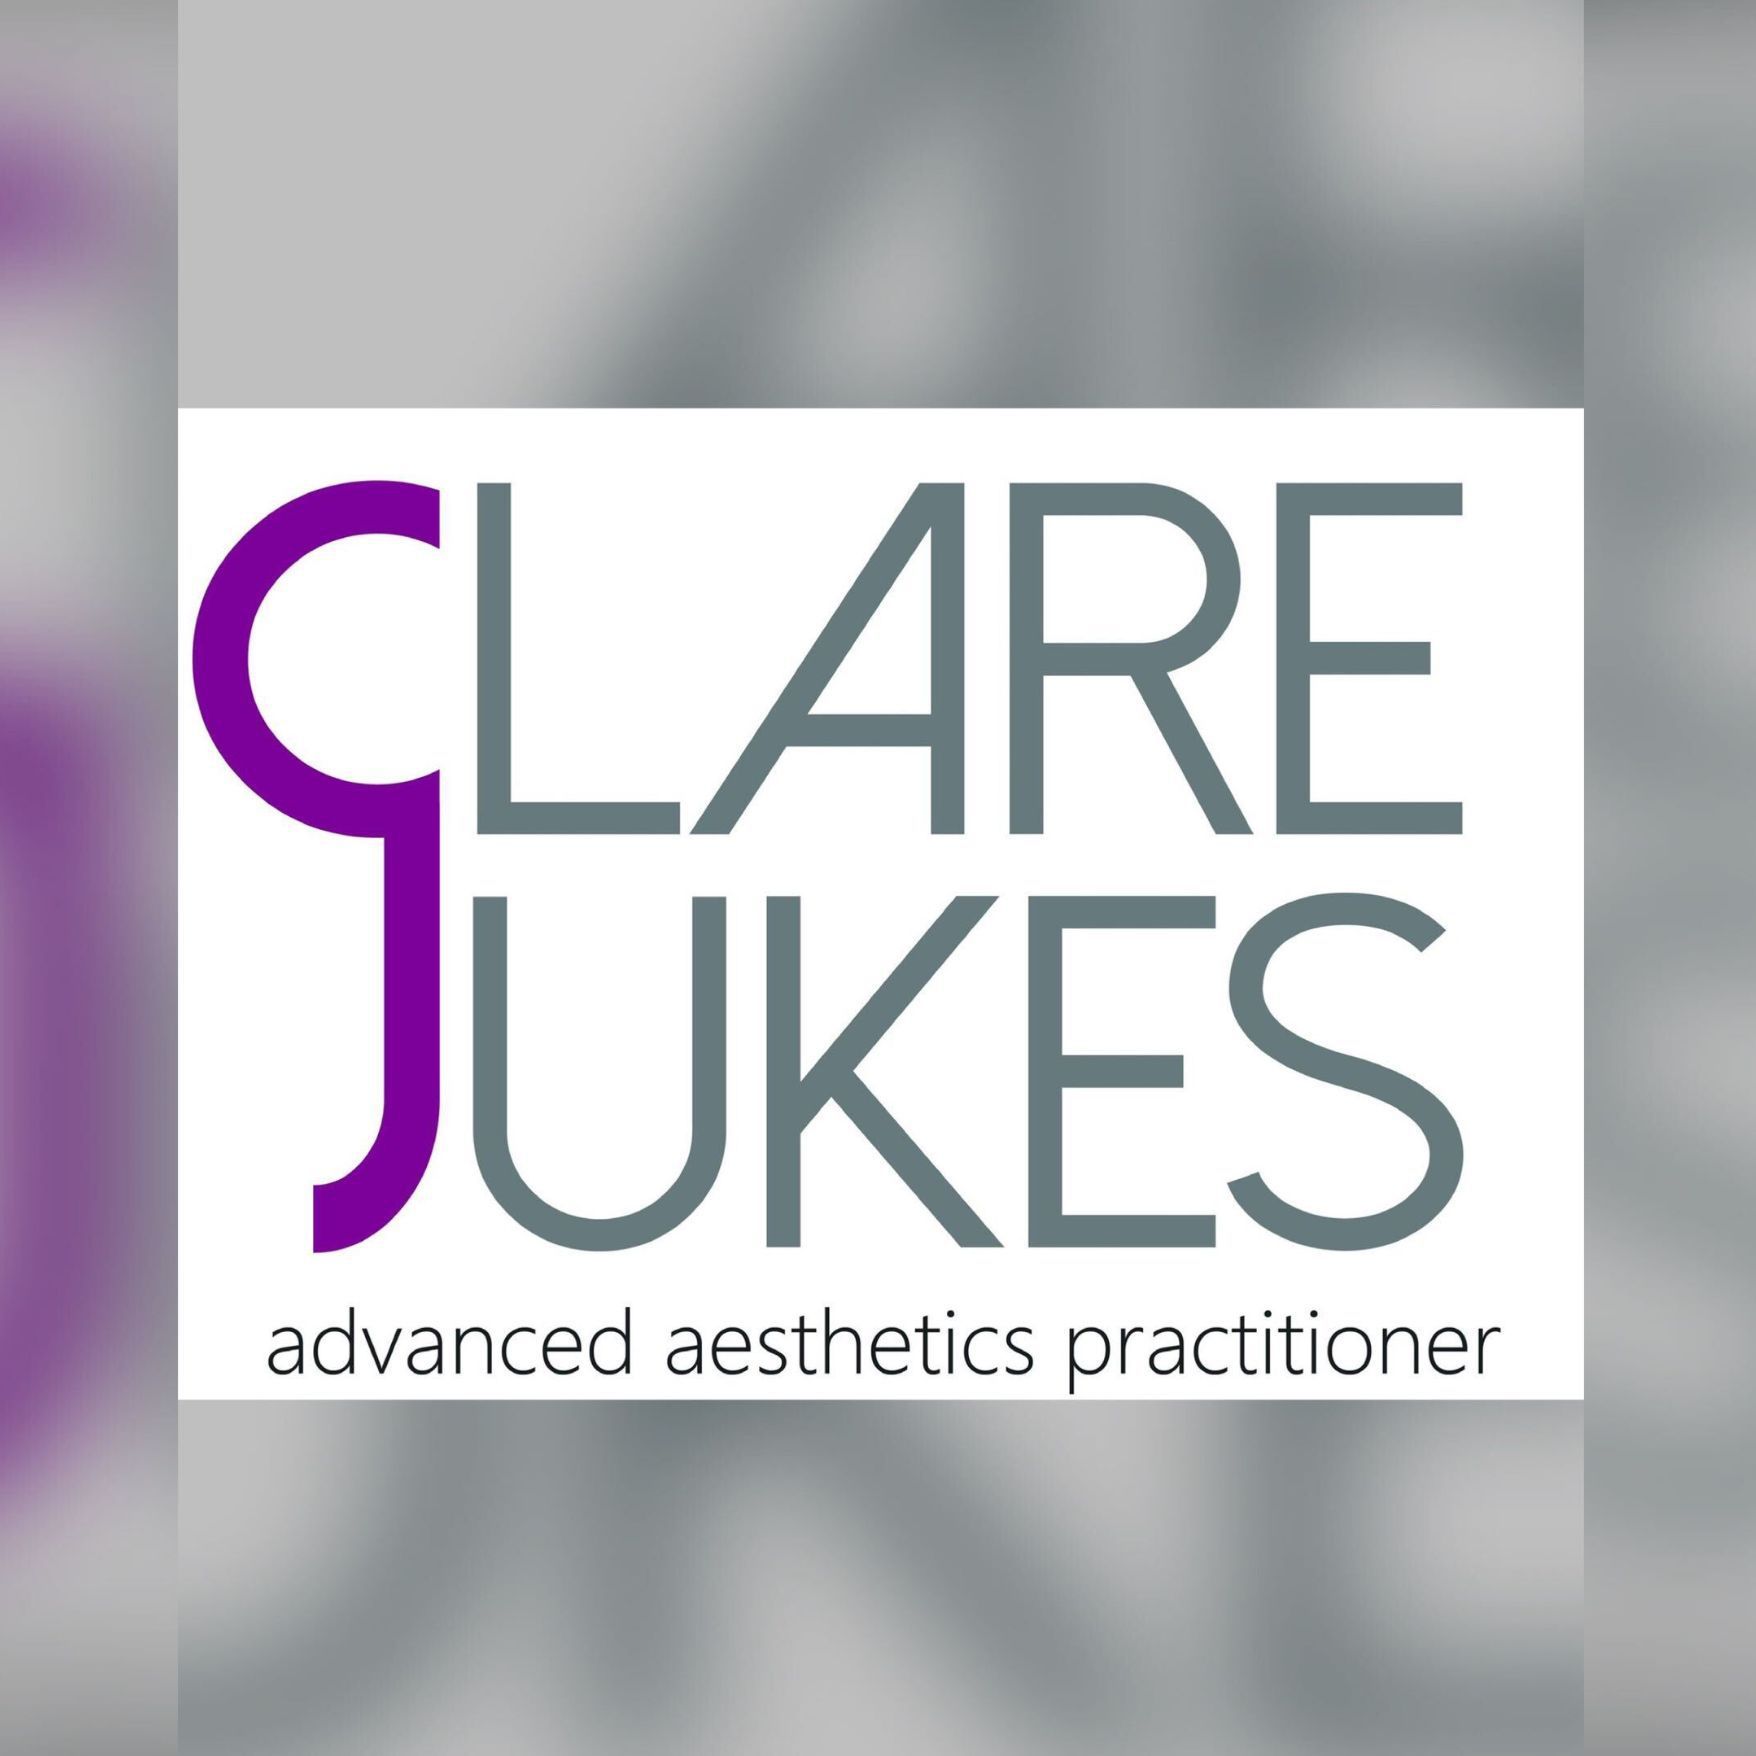 Clare jukes advanced cosmetics, 90 St Mildred’s Road, I tan, CT8 8RF, Westgate on Sea